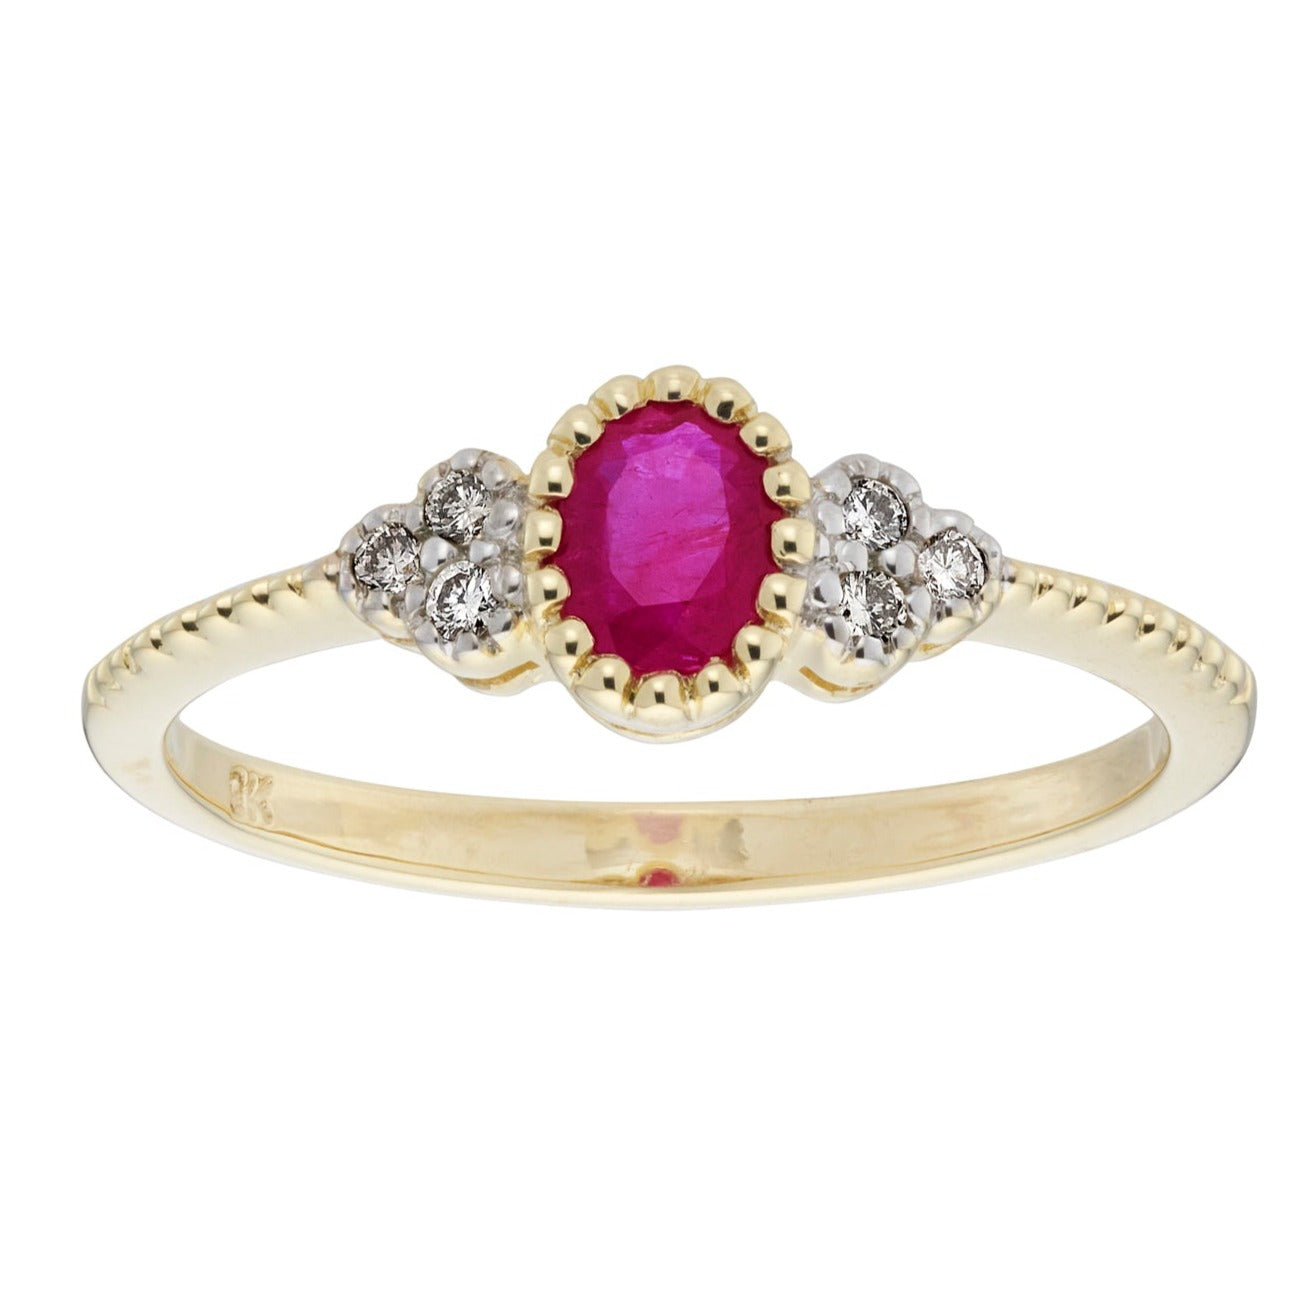 9ct gold 5x4mm oval ruby & diamond ring 0.07ct